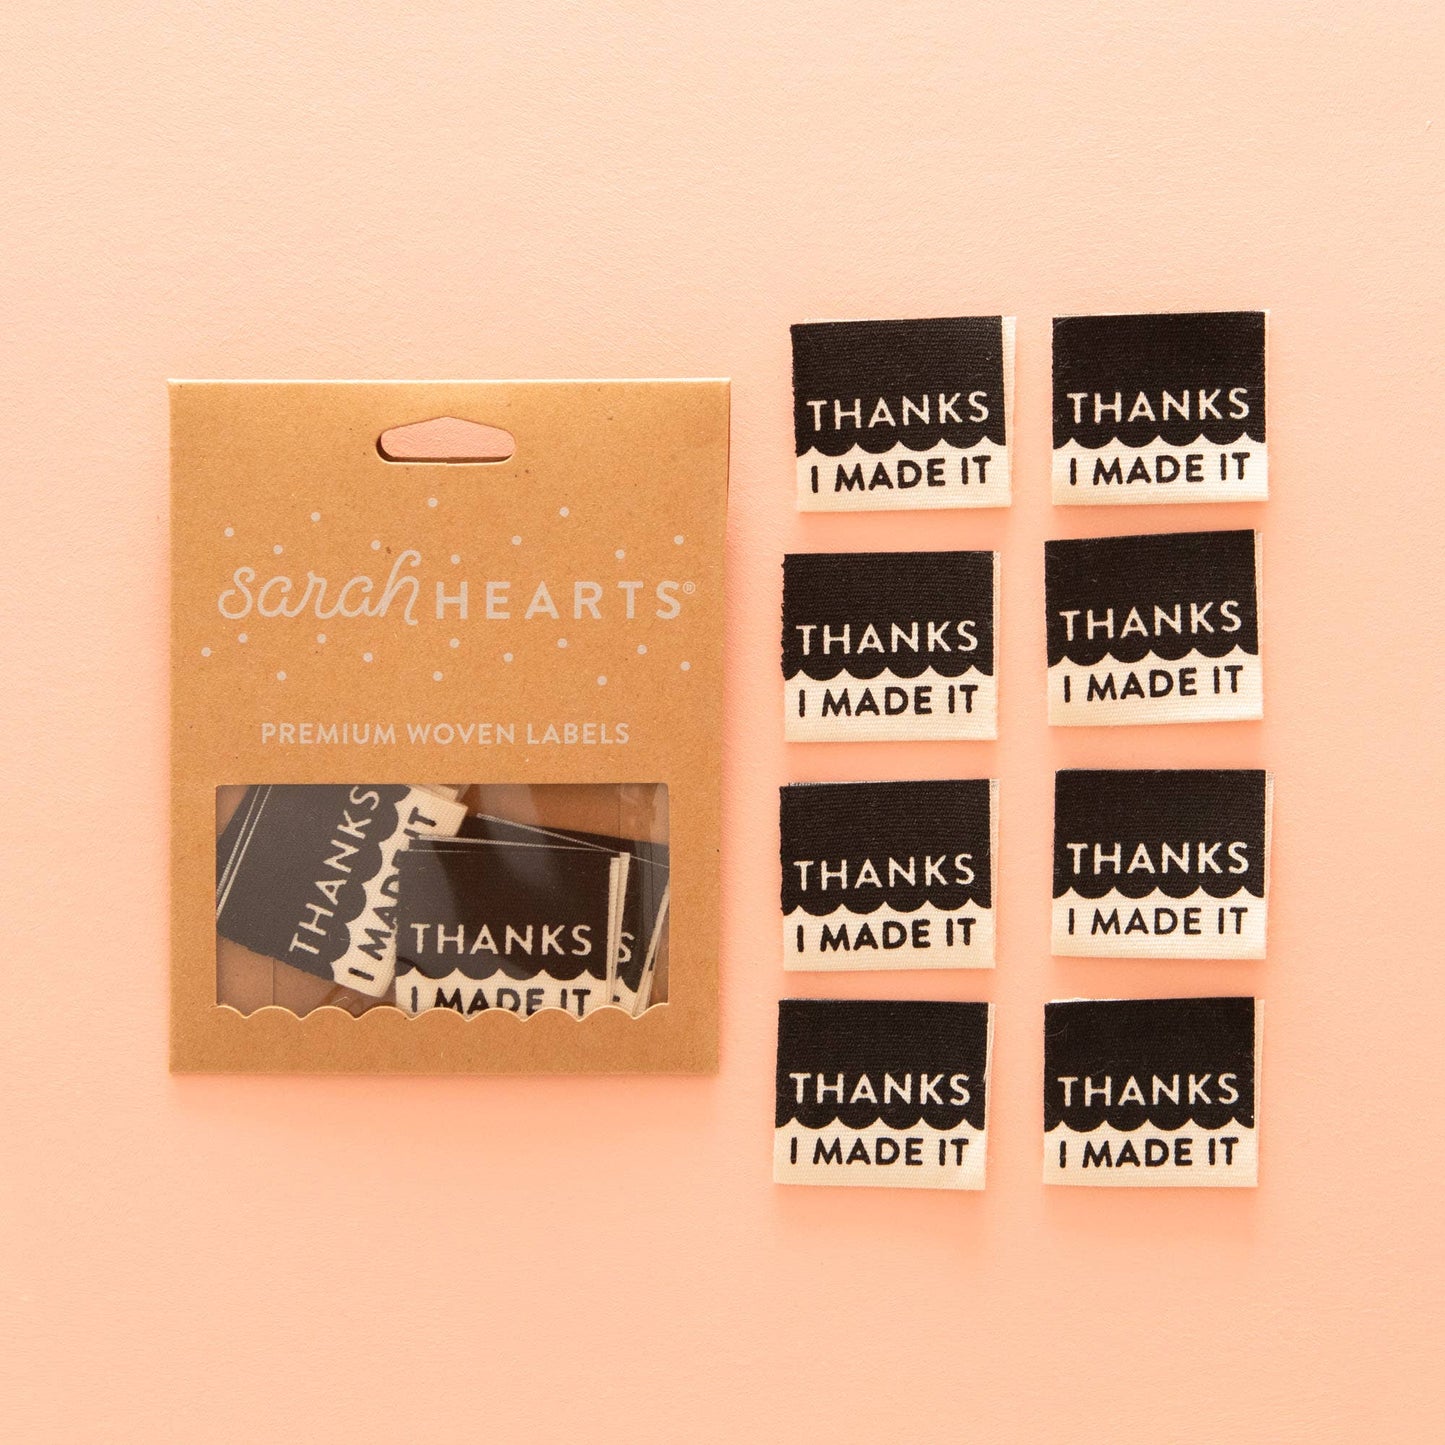 Thanks I Made It / Organic Cotton / Woven Labels / Sarah Hearts